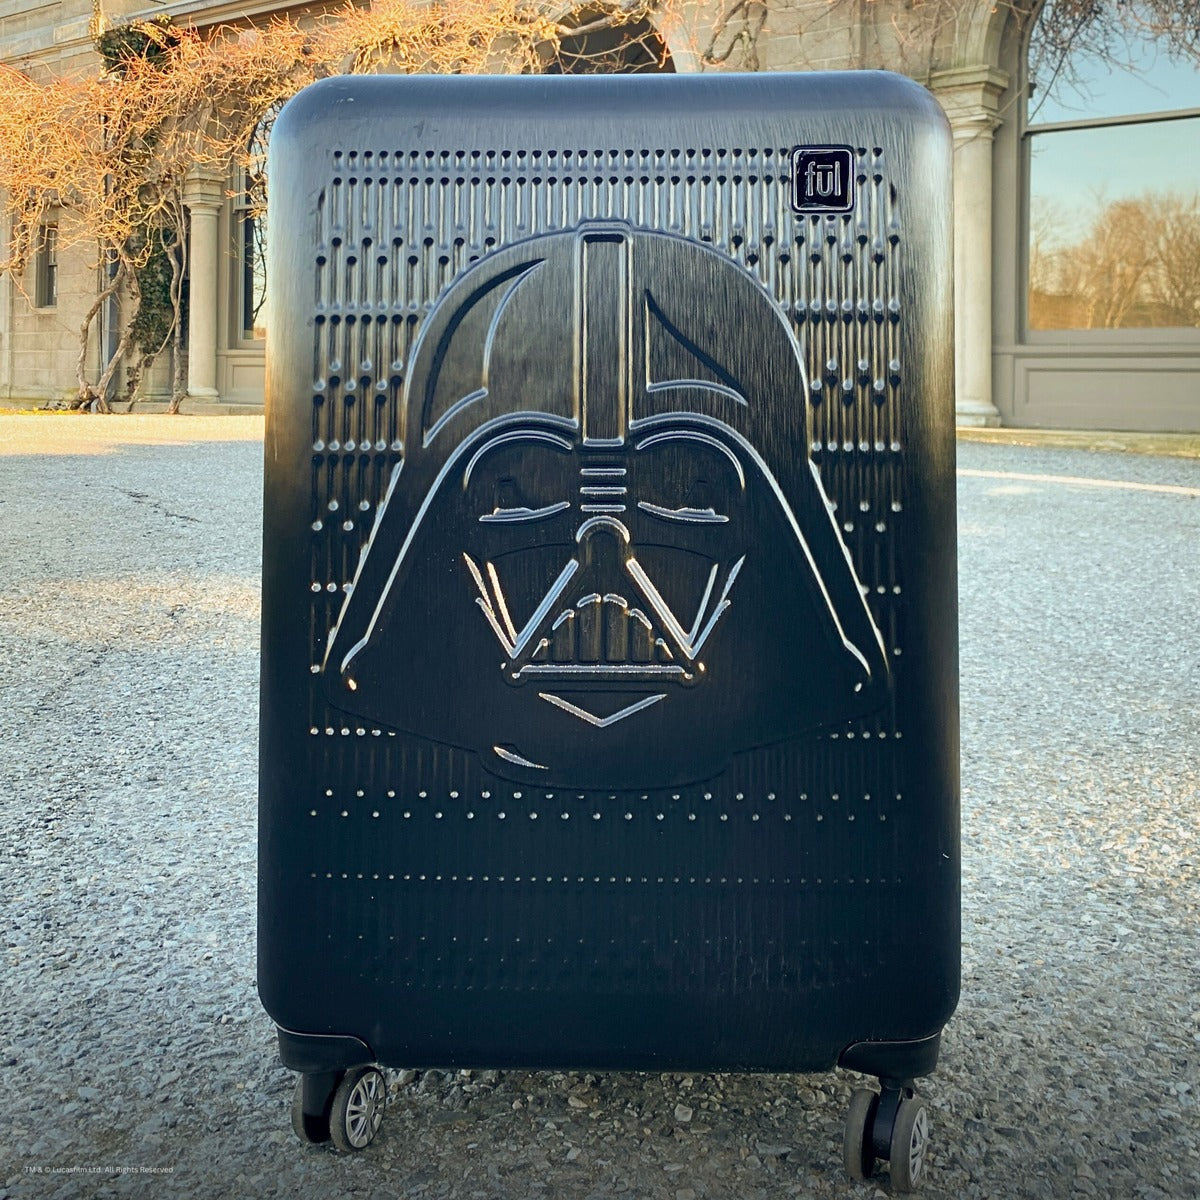 Star Wars Black Embossed spinner suitcase Darth Vader Checked Luggage